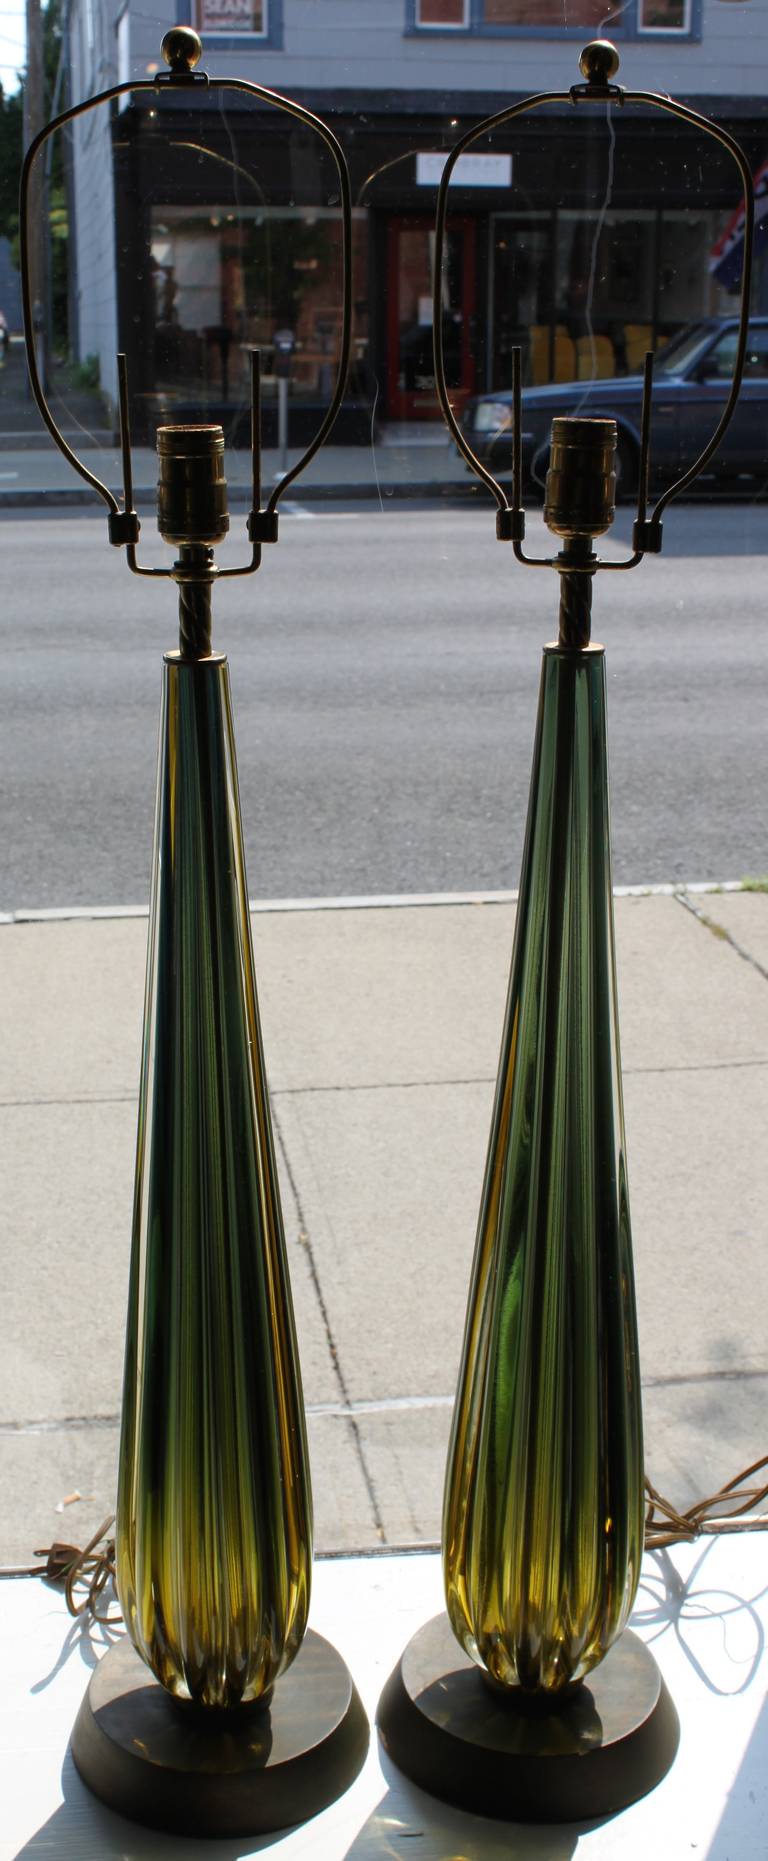 Pair of luminous solid, pulled Murano glass lamps. Camer label attached to one lamp.